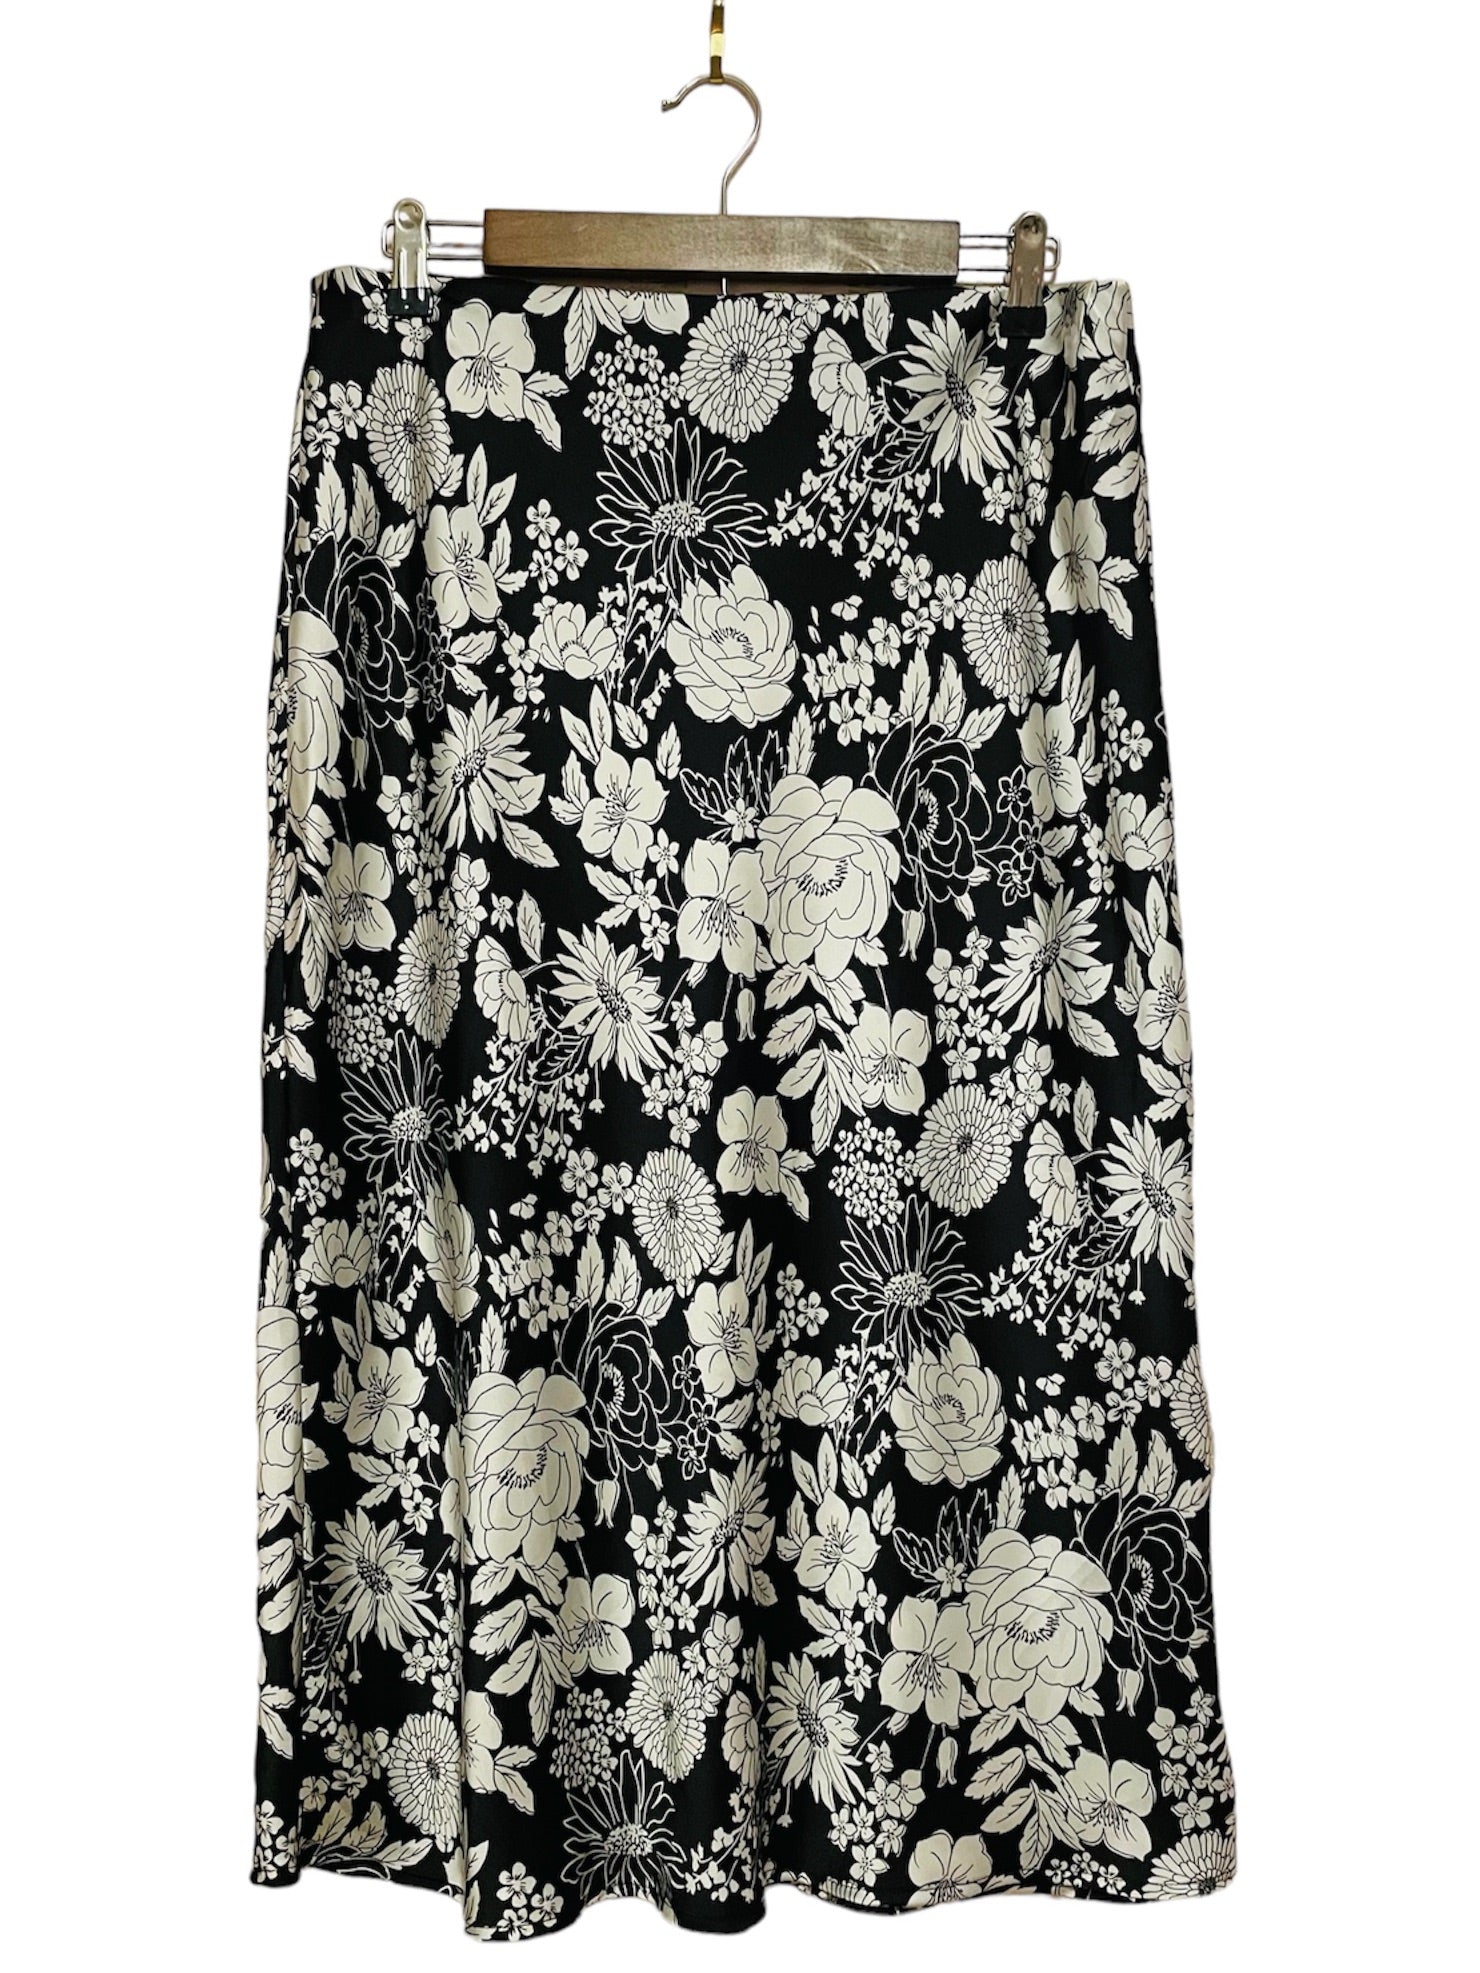 Black and White Floral Skirt Size: Large